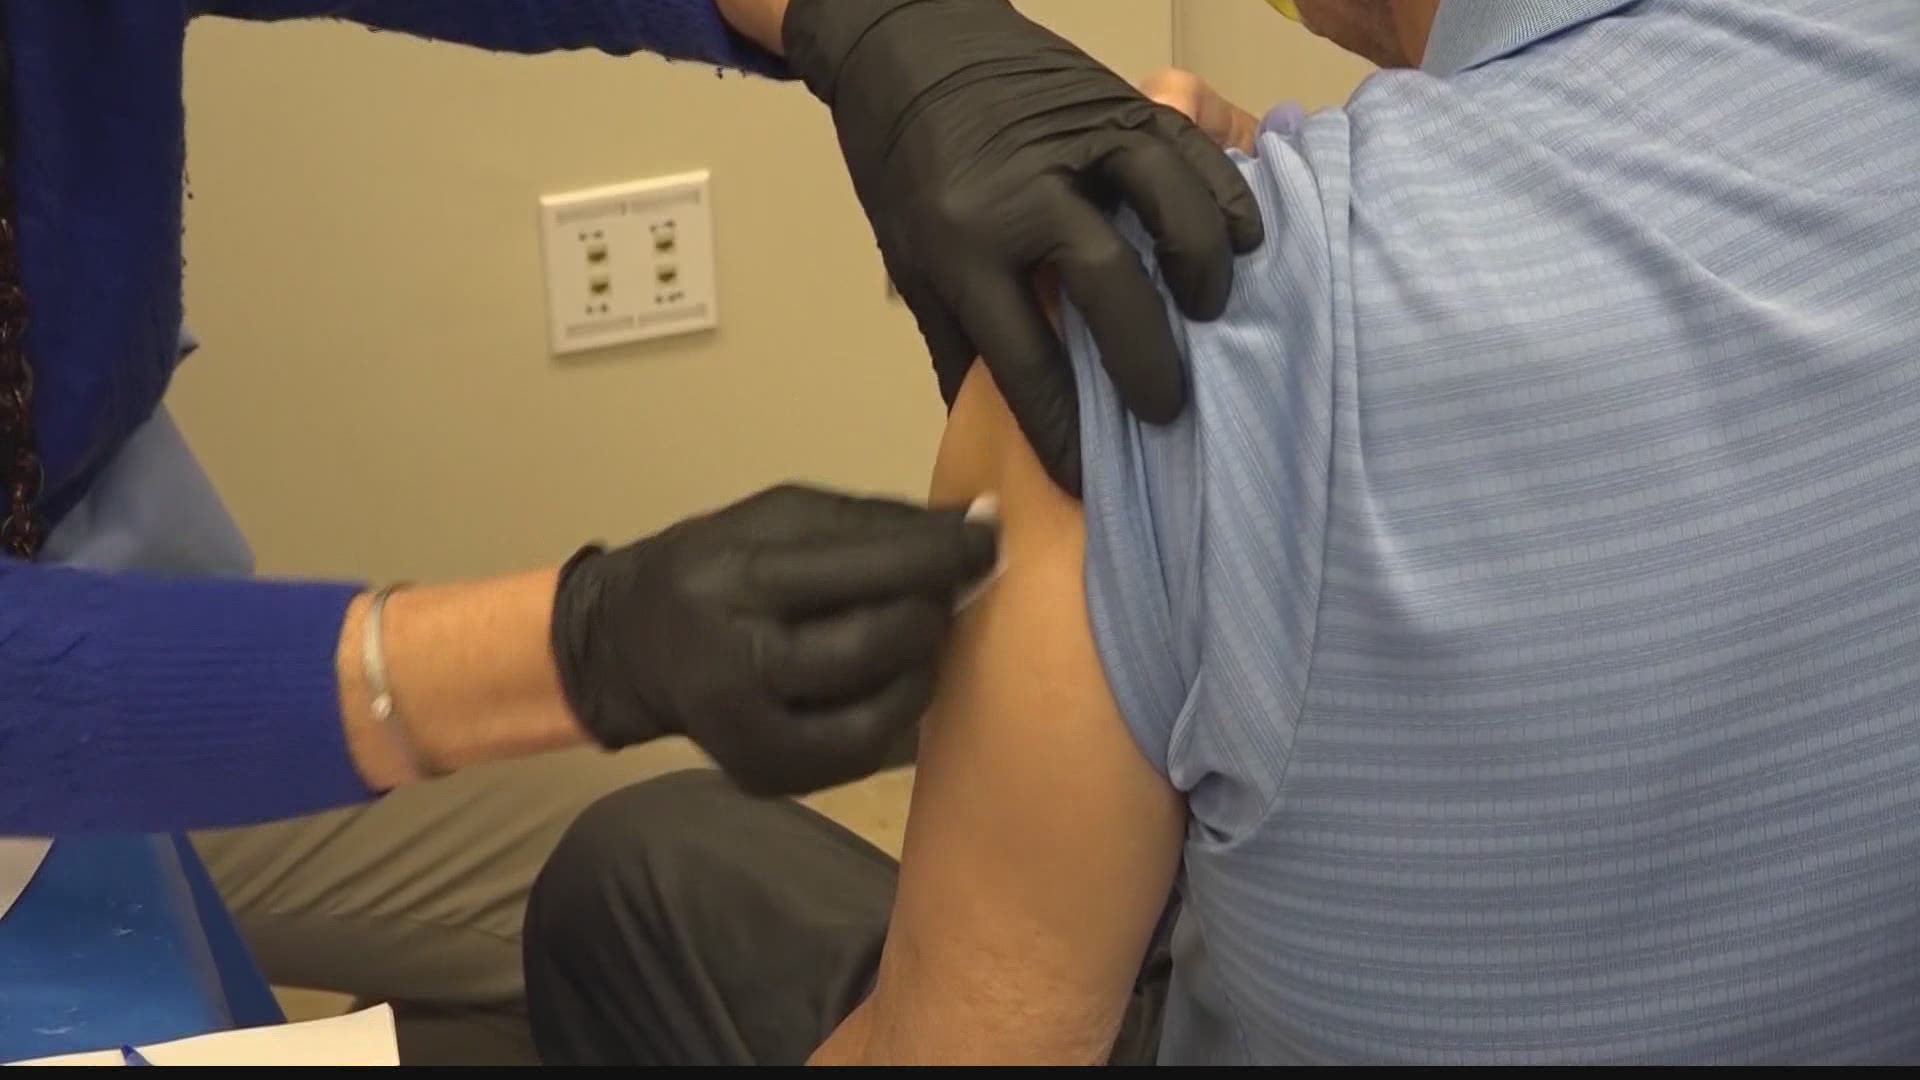 Alabama Department of Public Health leaders are hoping the vaccine doses will arrive by the end of this week.